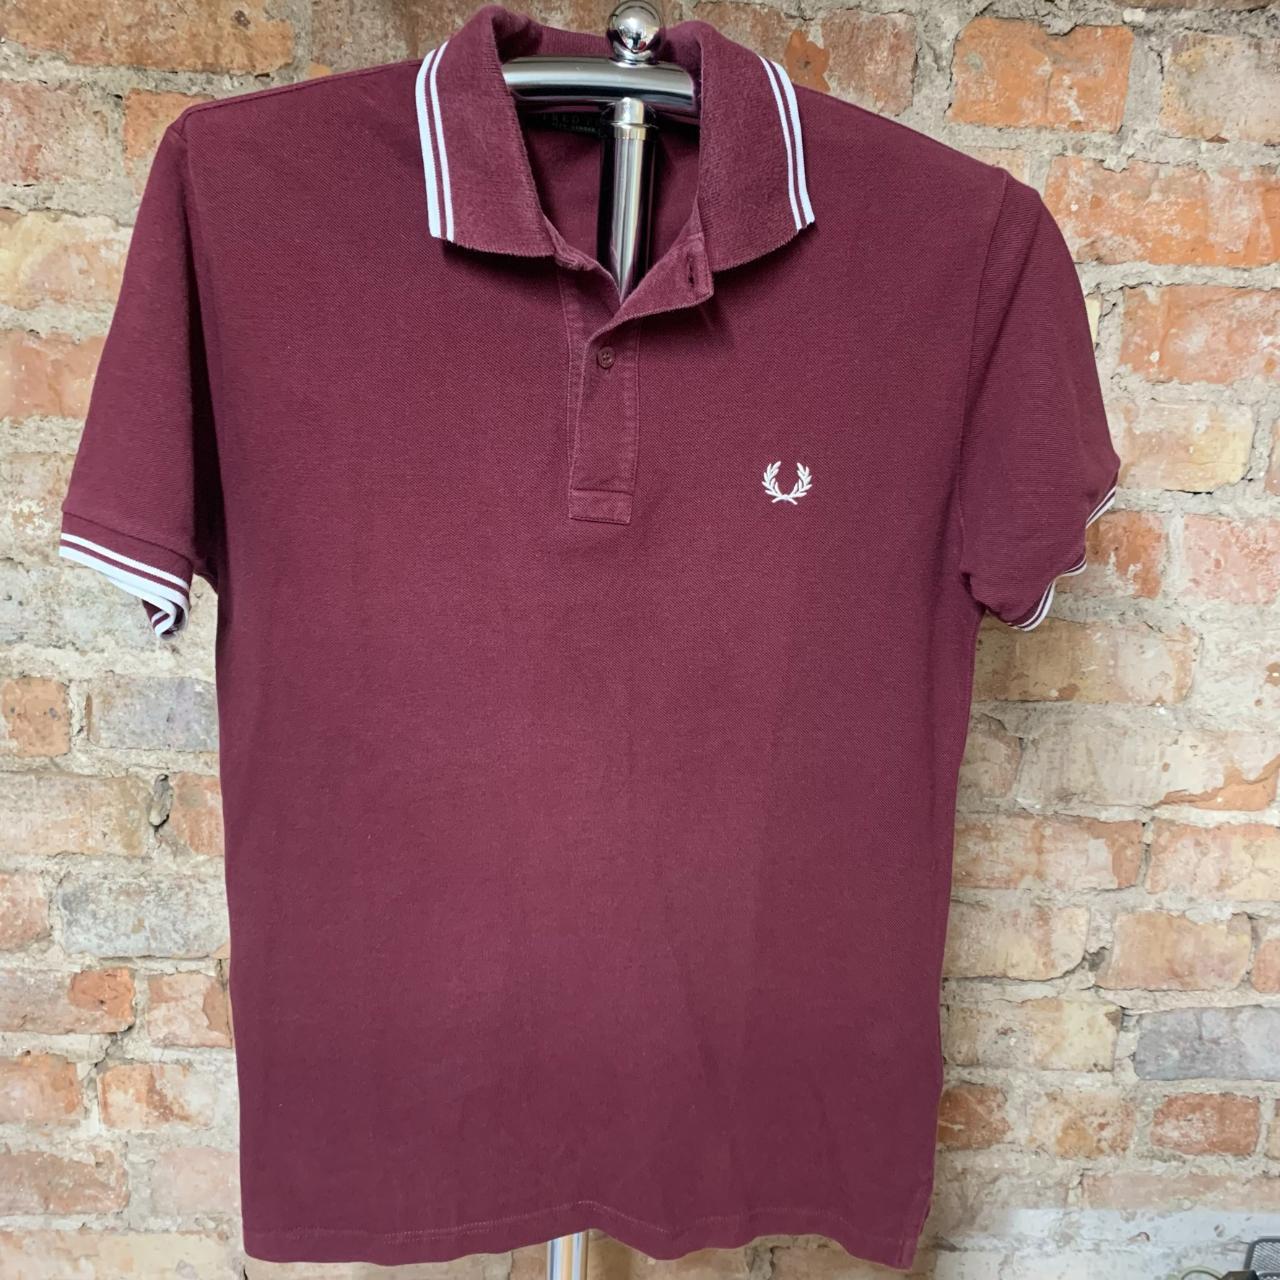 Mens's Preloved Fred Perry Maroon Polo Shirt 40